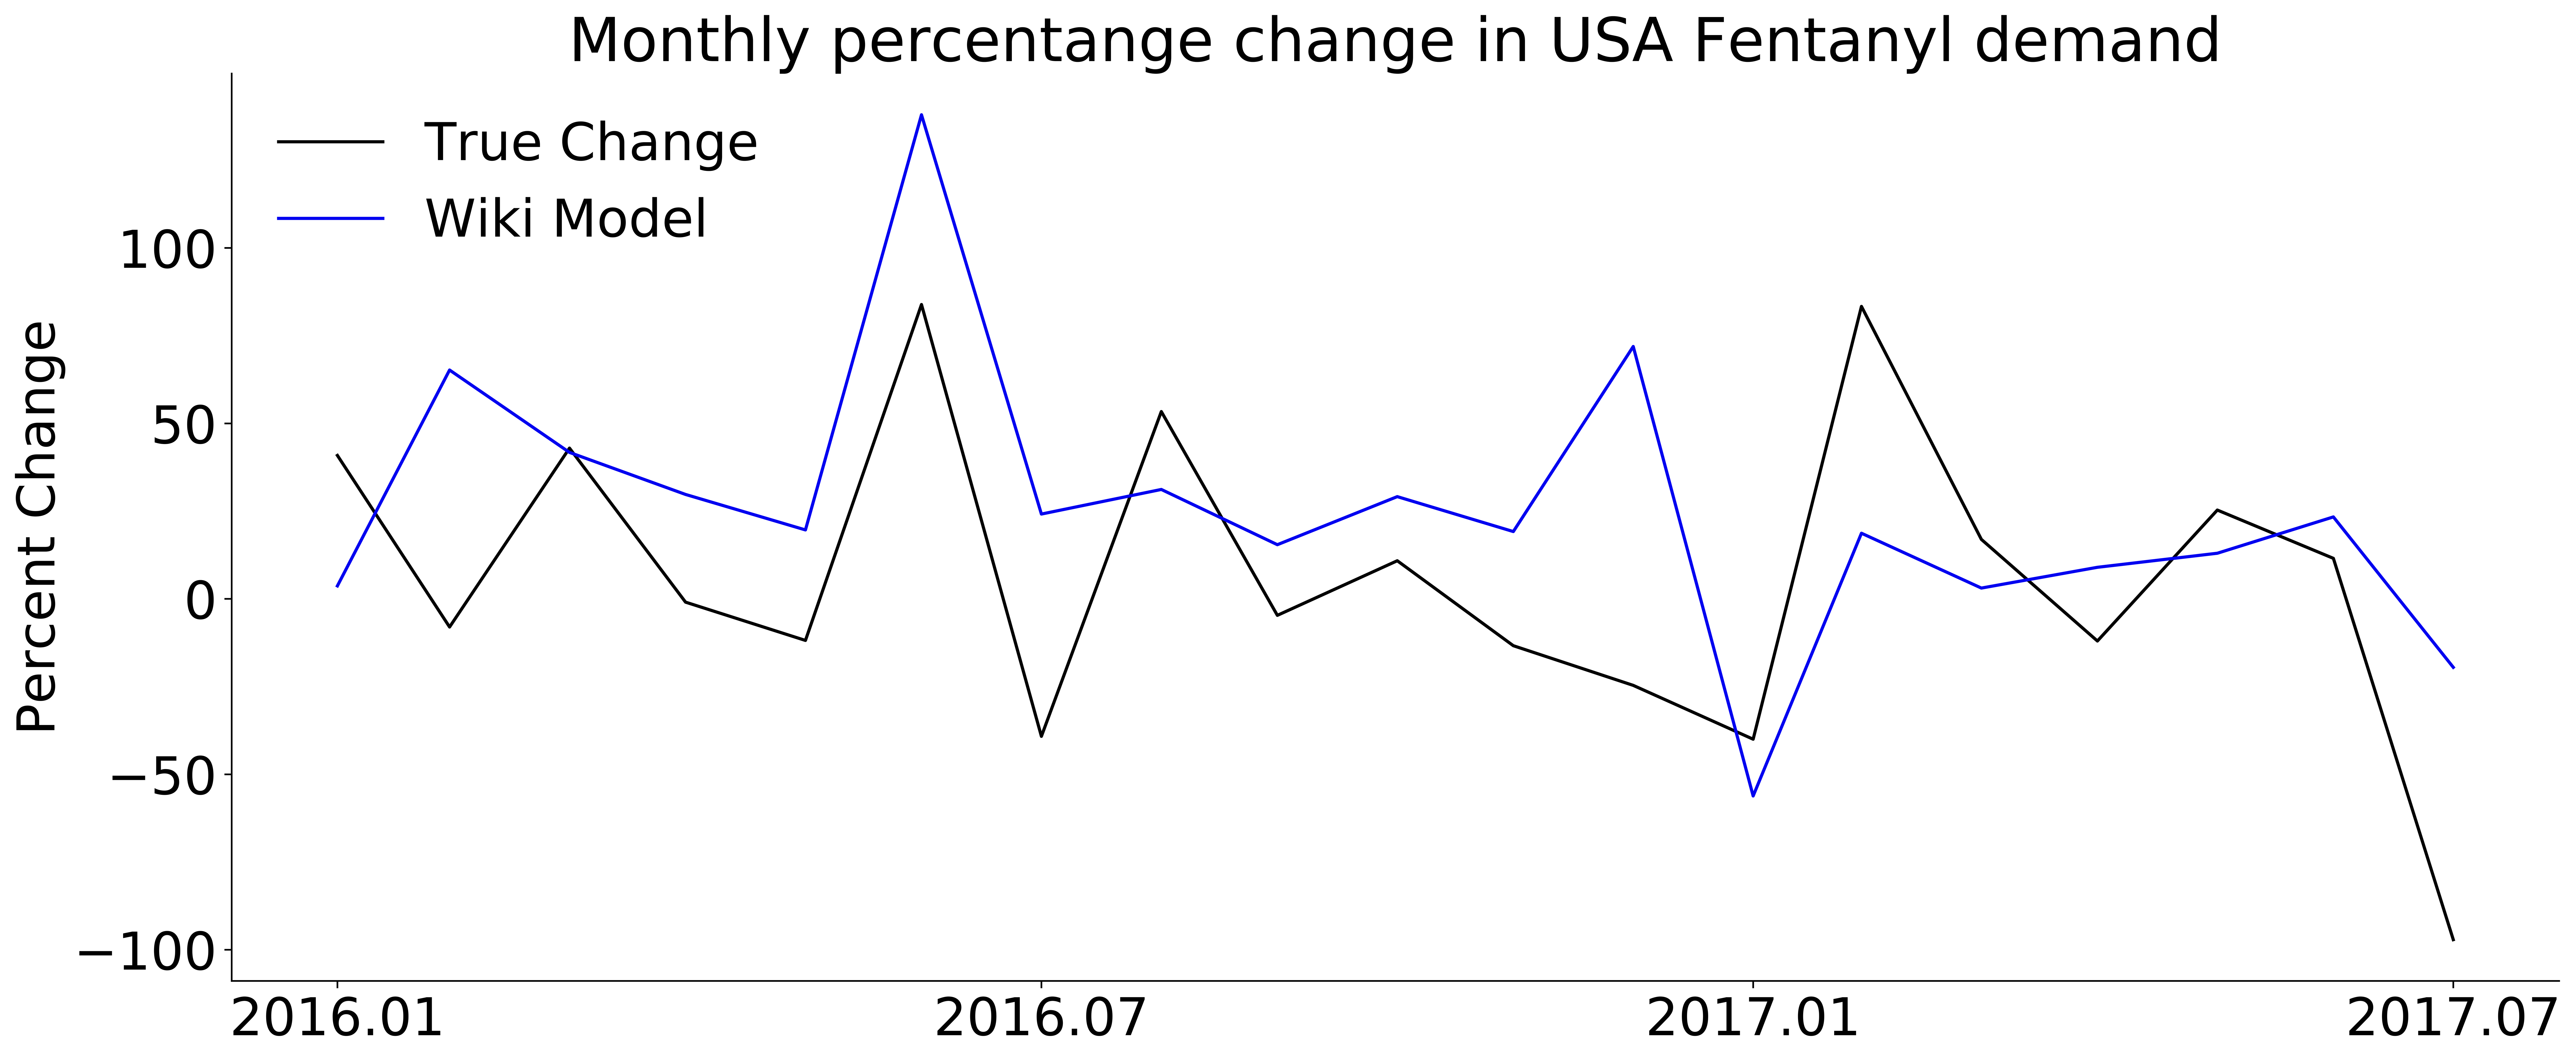 Monthly percentage change in USA Fentanyl demand